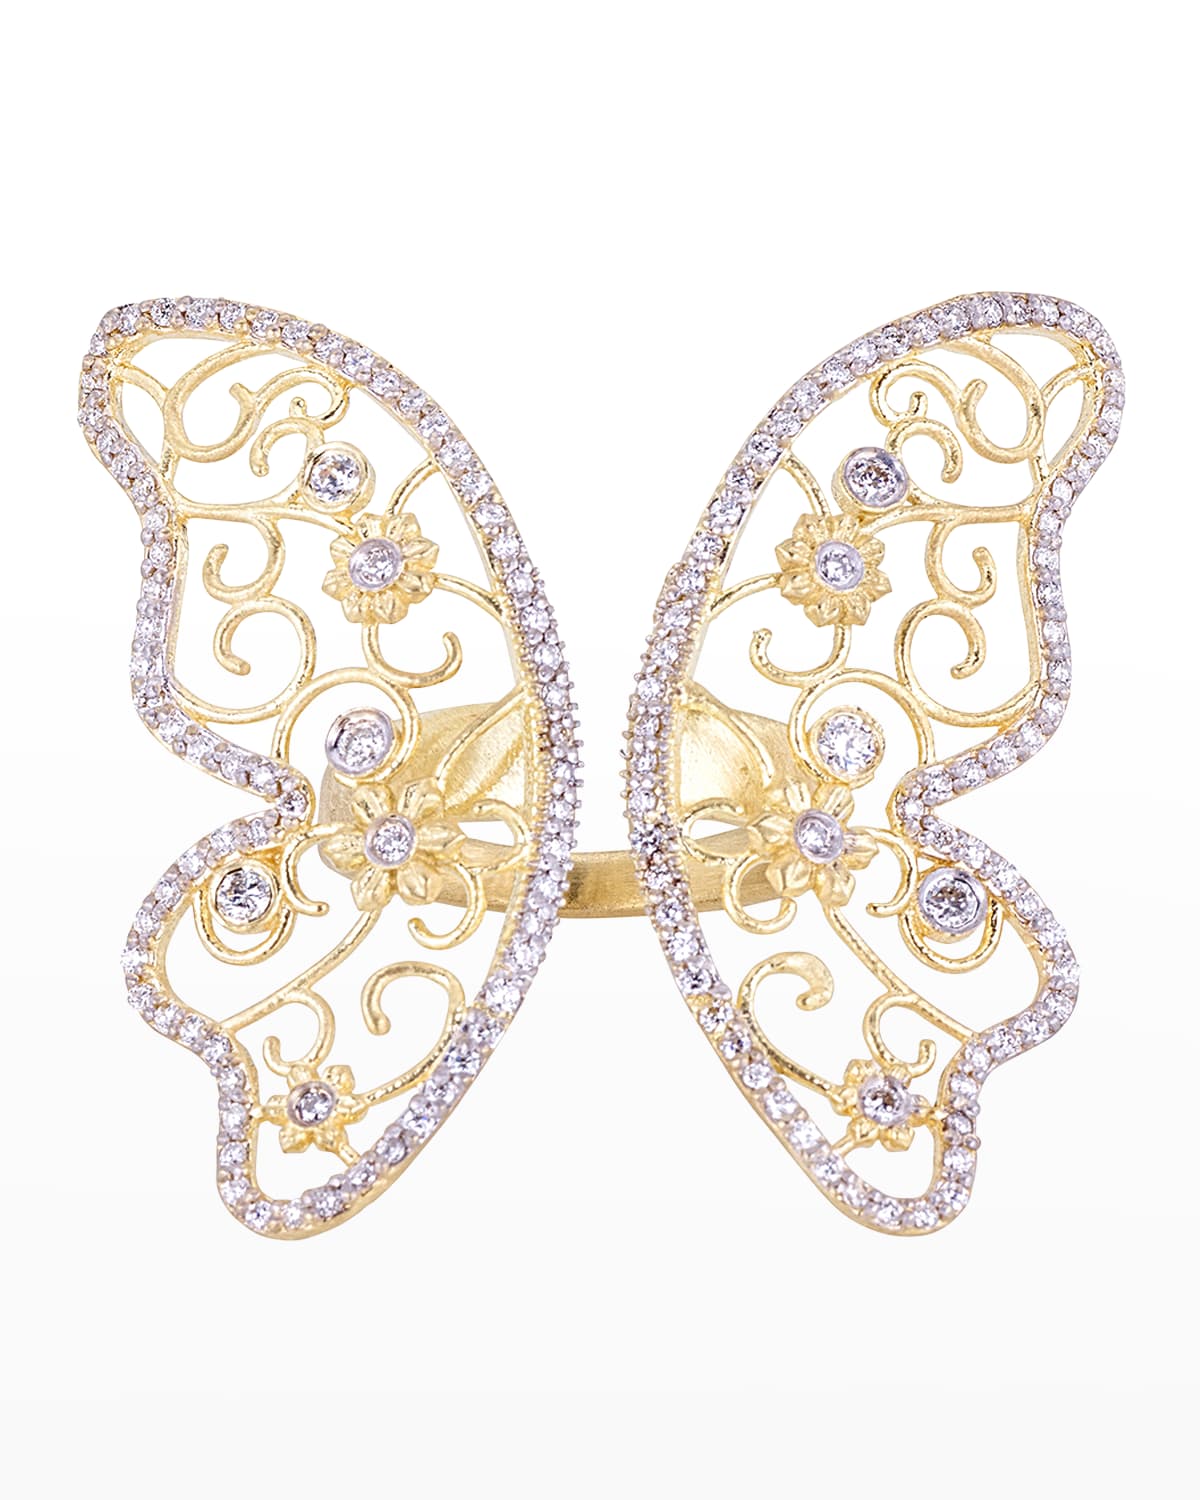 Tanya Farah Garden Butterfly Ring With Champagne And White Diamonds In Yellow Gold